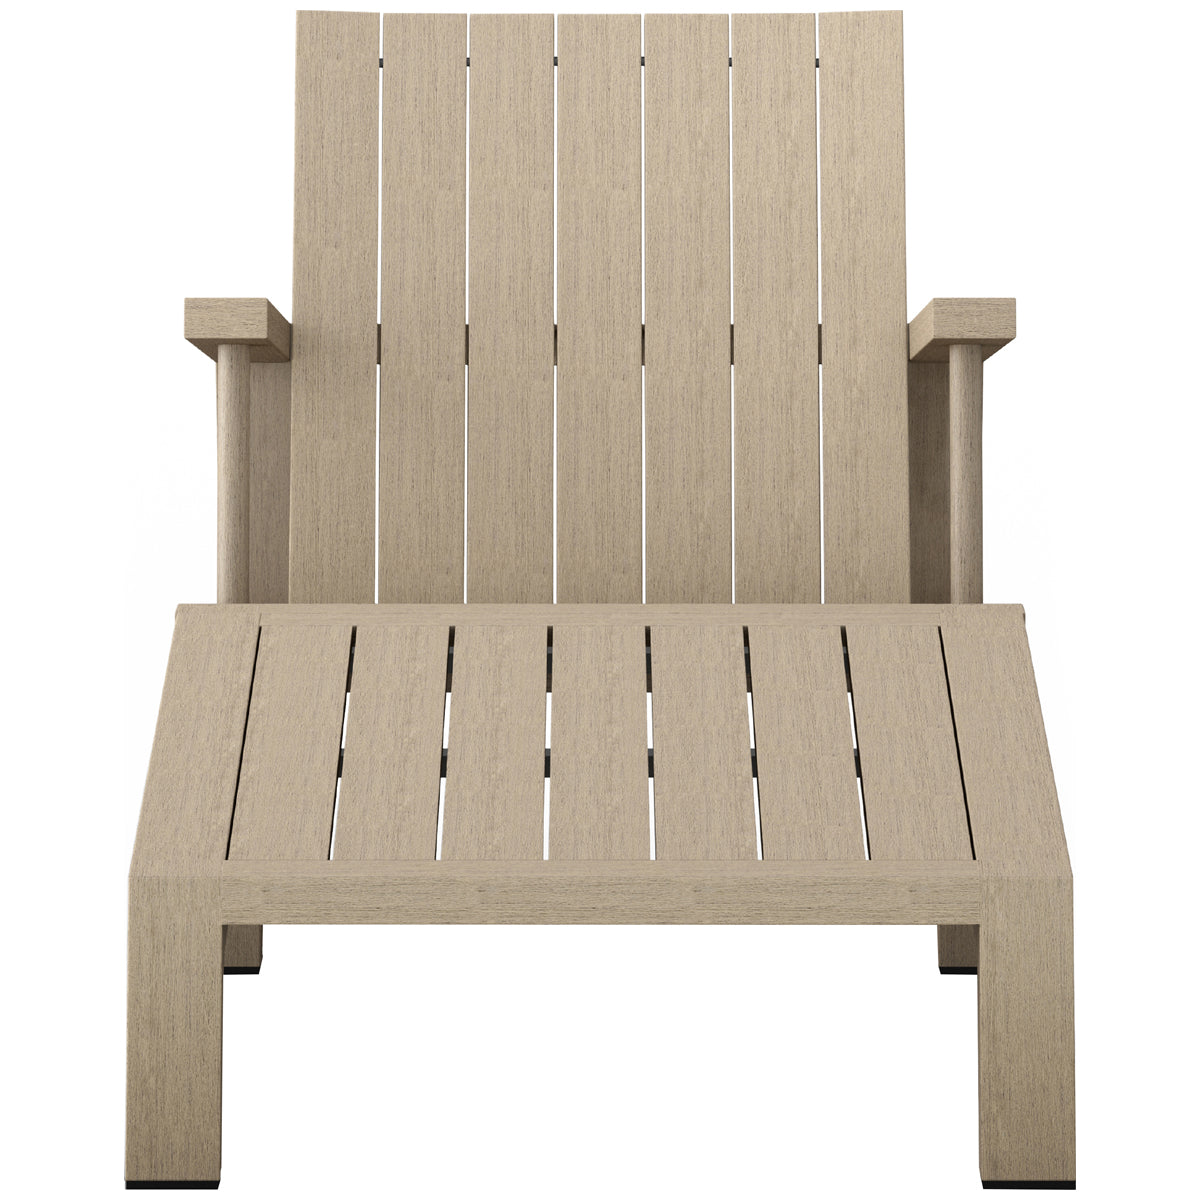 Four Hands Solano Dorsey Outdoor Chair with Ottoman